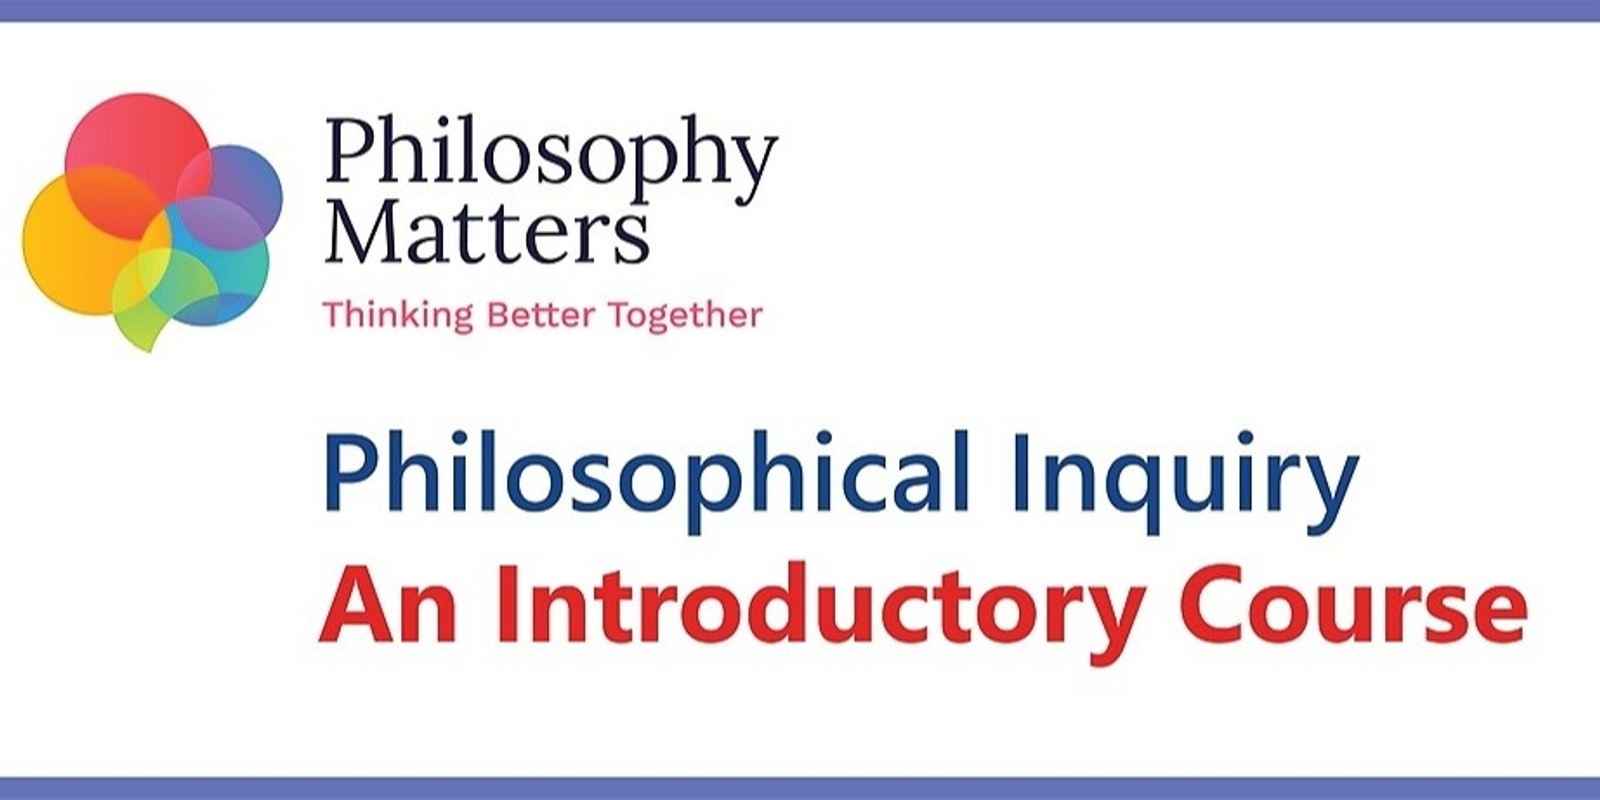 Banner image for Philosophical Inquiry Introductory Course 21-22 MAR 2022